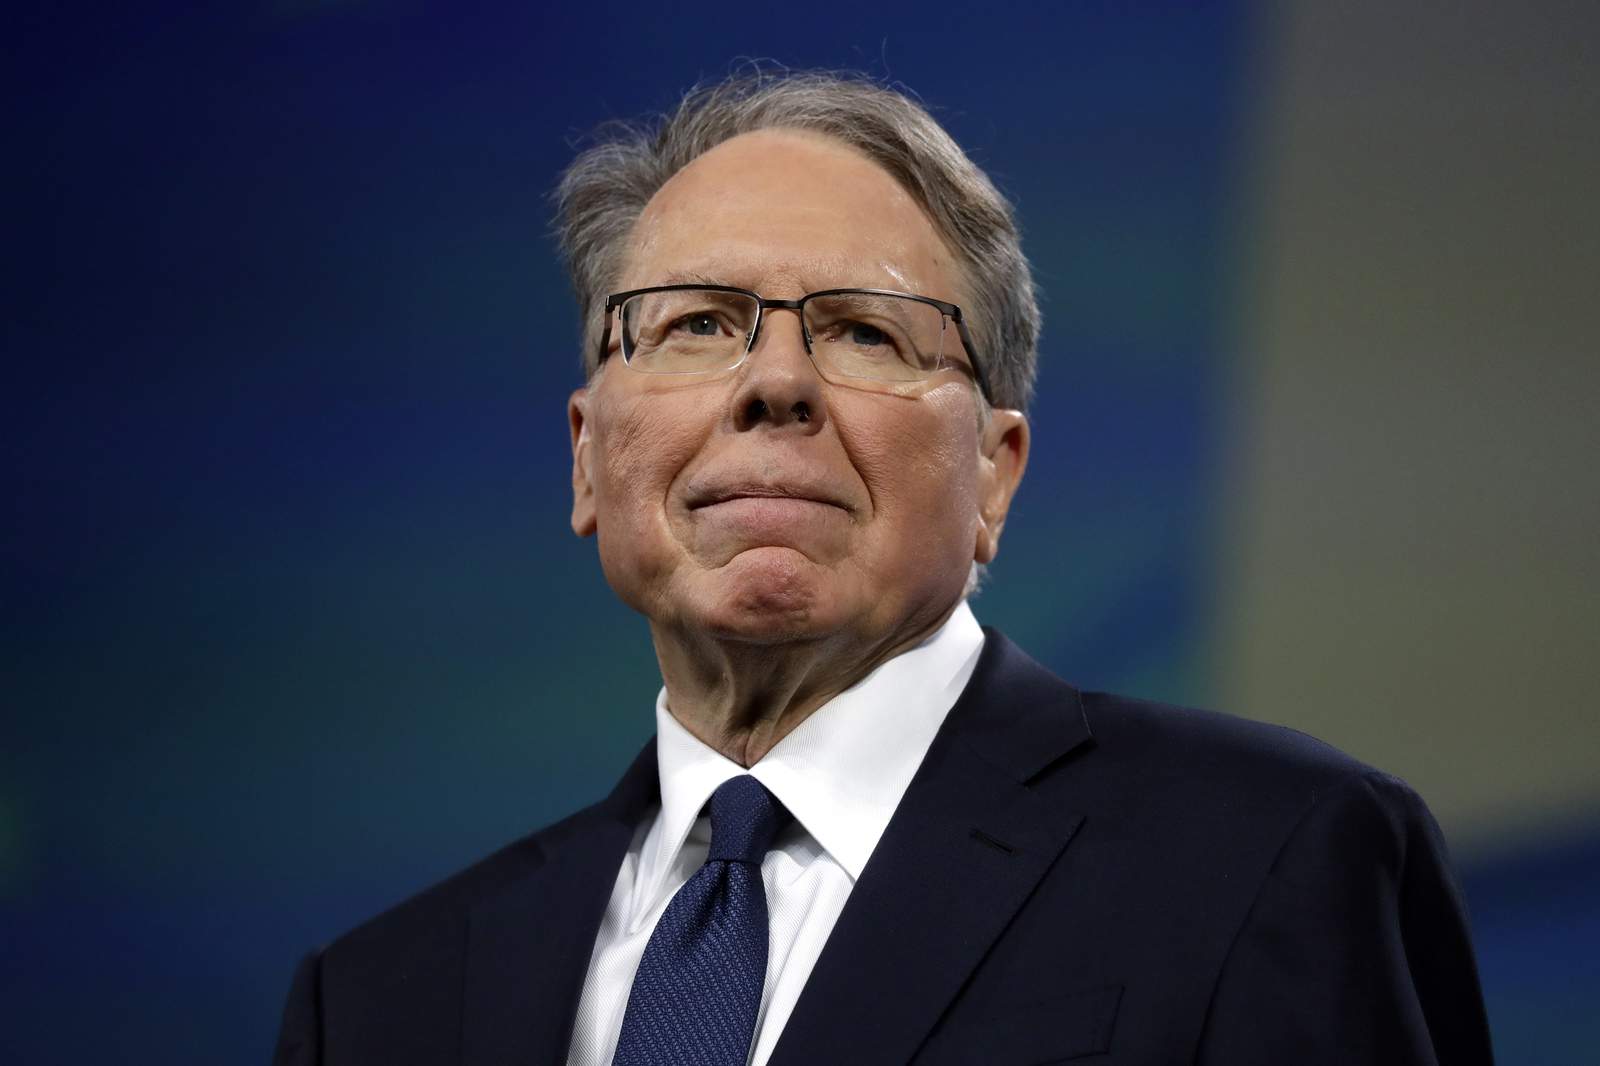 NRA trial opens window on secretive leader's life and work